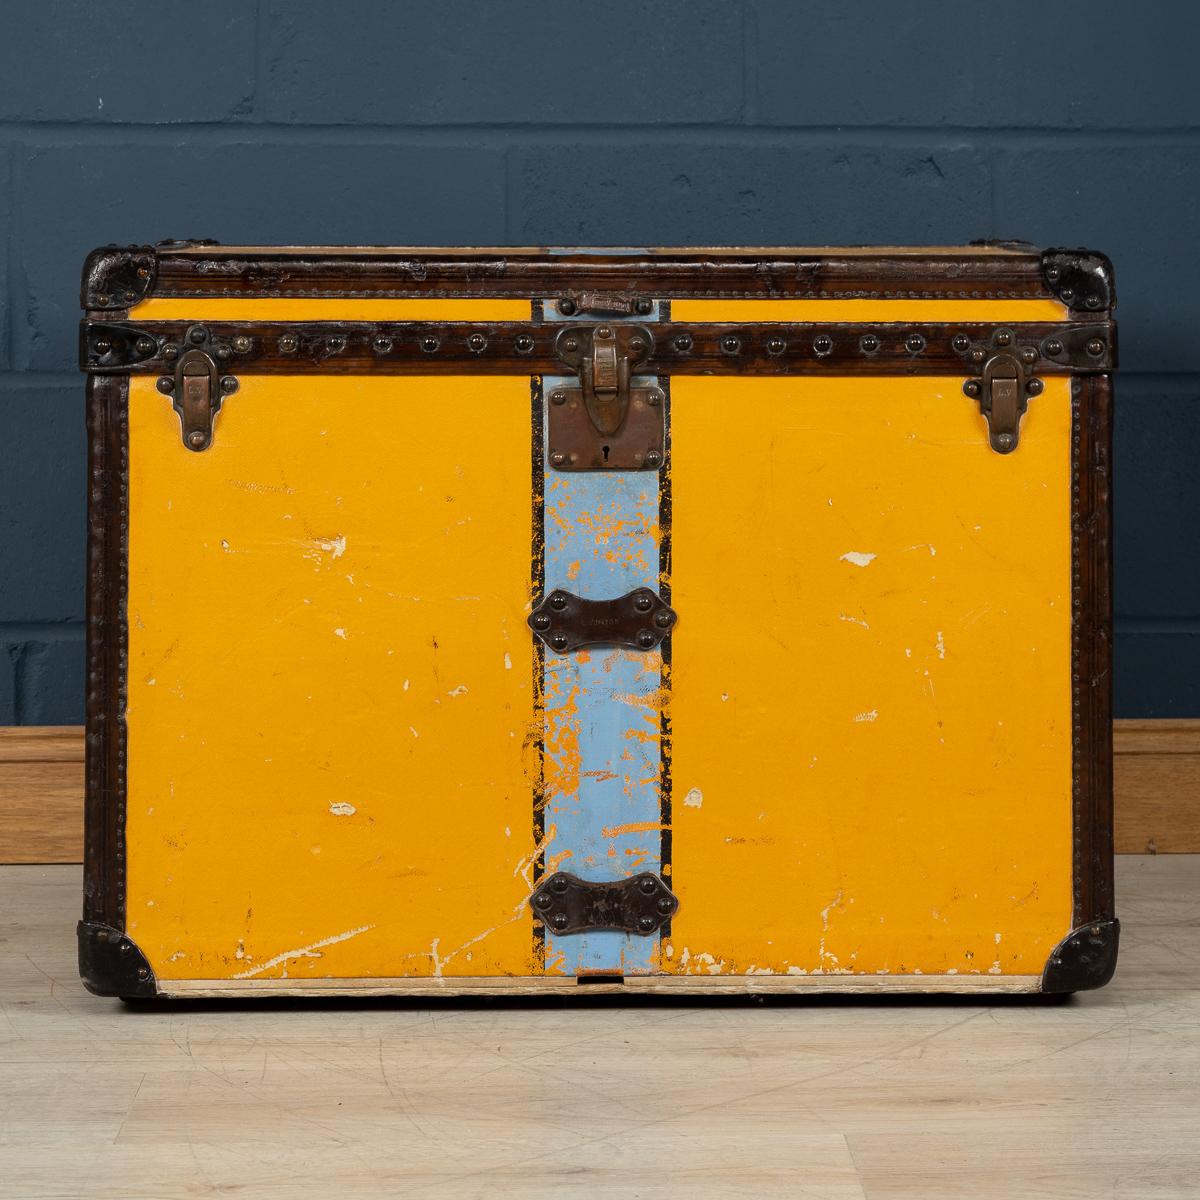 A very rare wardrobe trunk by Louis Vuitton dating to the early part of the 20th century (circa 1900-1910). Covered in the famous orange “Vuittonite“ canvas, this horizontal courier trunk is much rarer than its monogrammed brothers with its stain